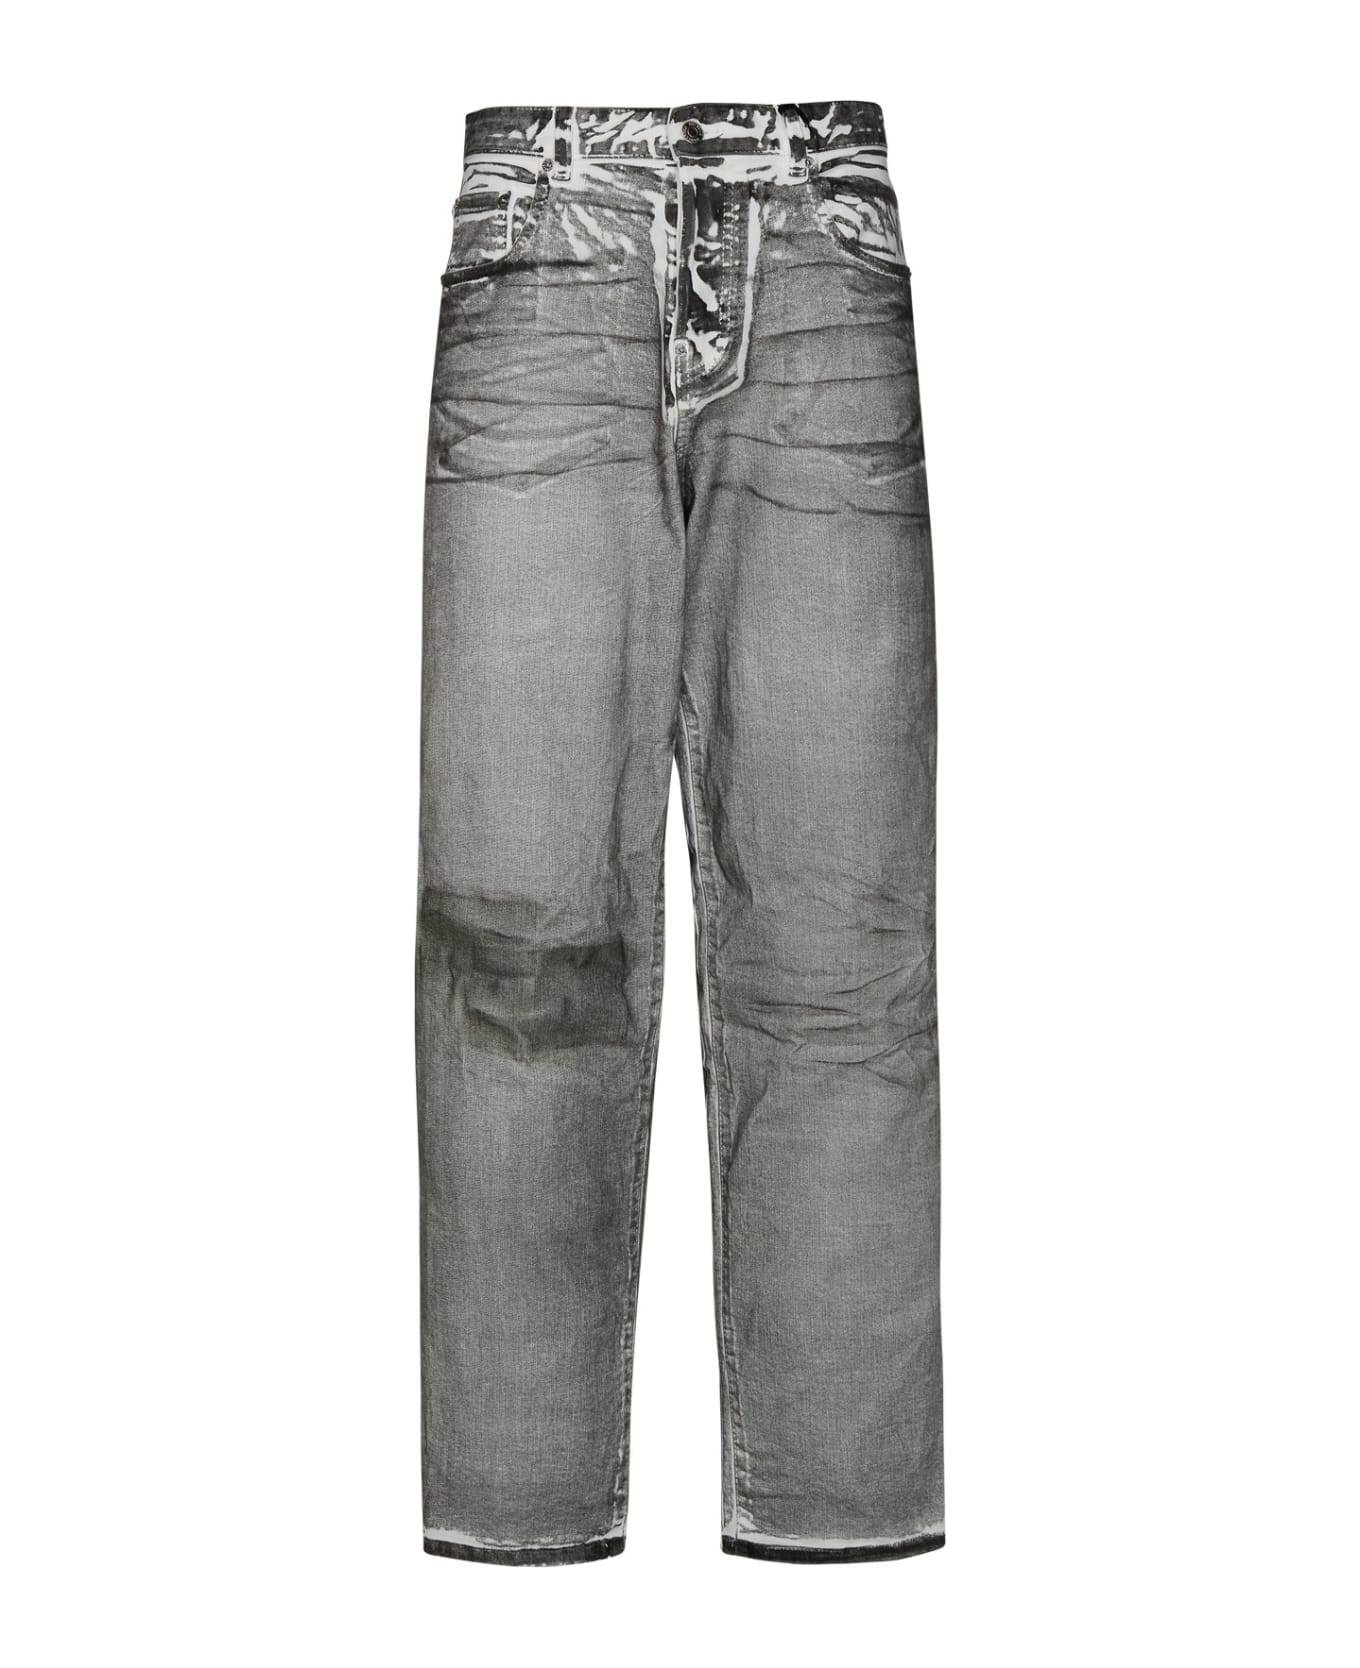 Dsquared2 Gray Tommy Jeans - GREY/WHITE